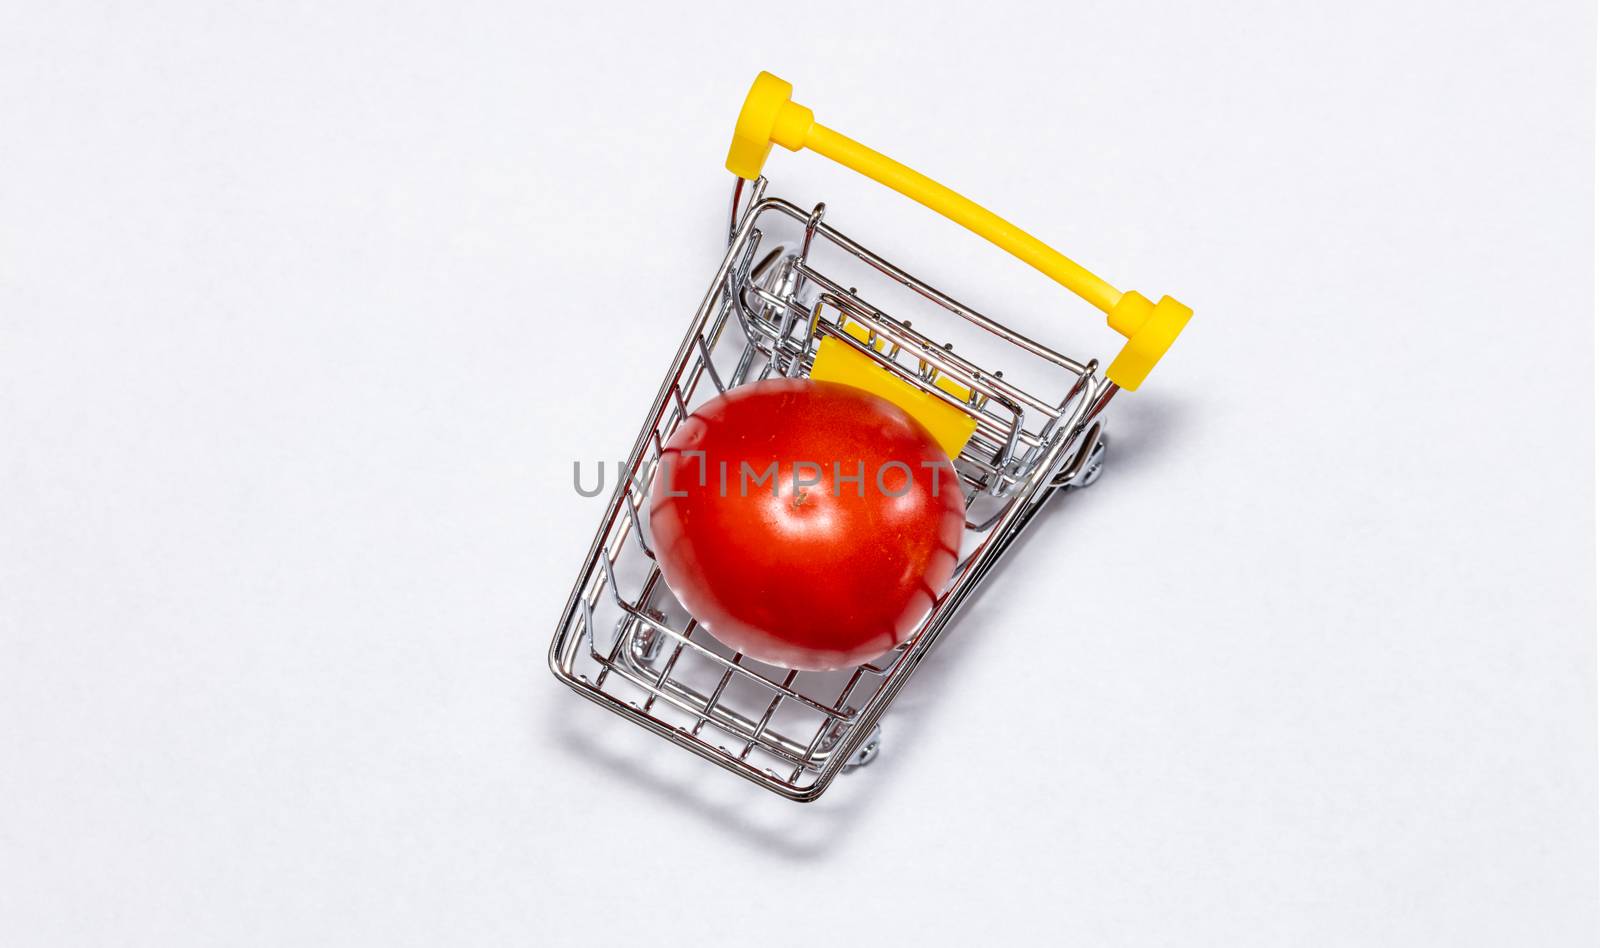 Shot of a single tomato in shopping cart isolated on white background. Top view. Ripe tasty red tomatos in shopping cart. Tomato trading concept. Online shopping concept. Copy space.